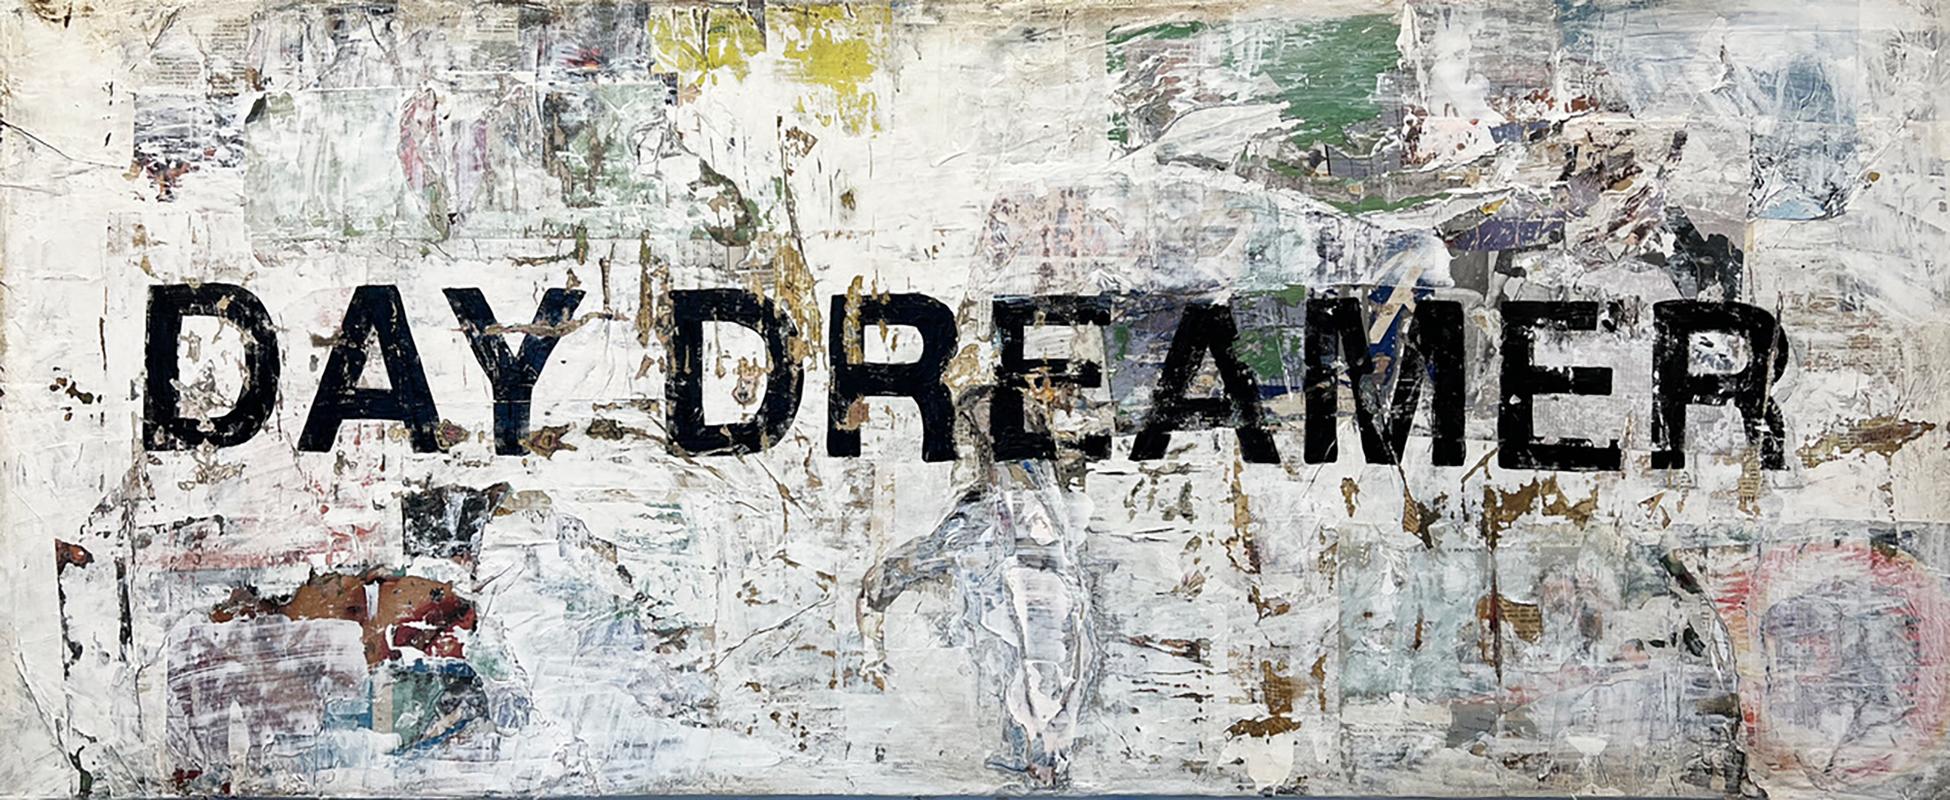 GREG MILLER
"Day Dreamer" 
Acrylic, Collage
24 x 60 in.

Drawing from the diverse cultural and geographic makeup of his Californian roots, Greg Miller explores his relationship with the space he inhabits to communicate a particular urban experience.